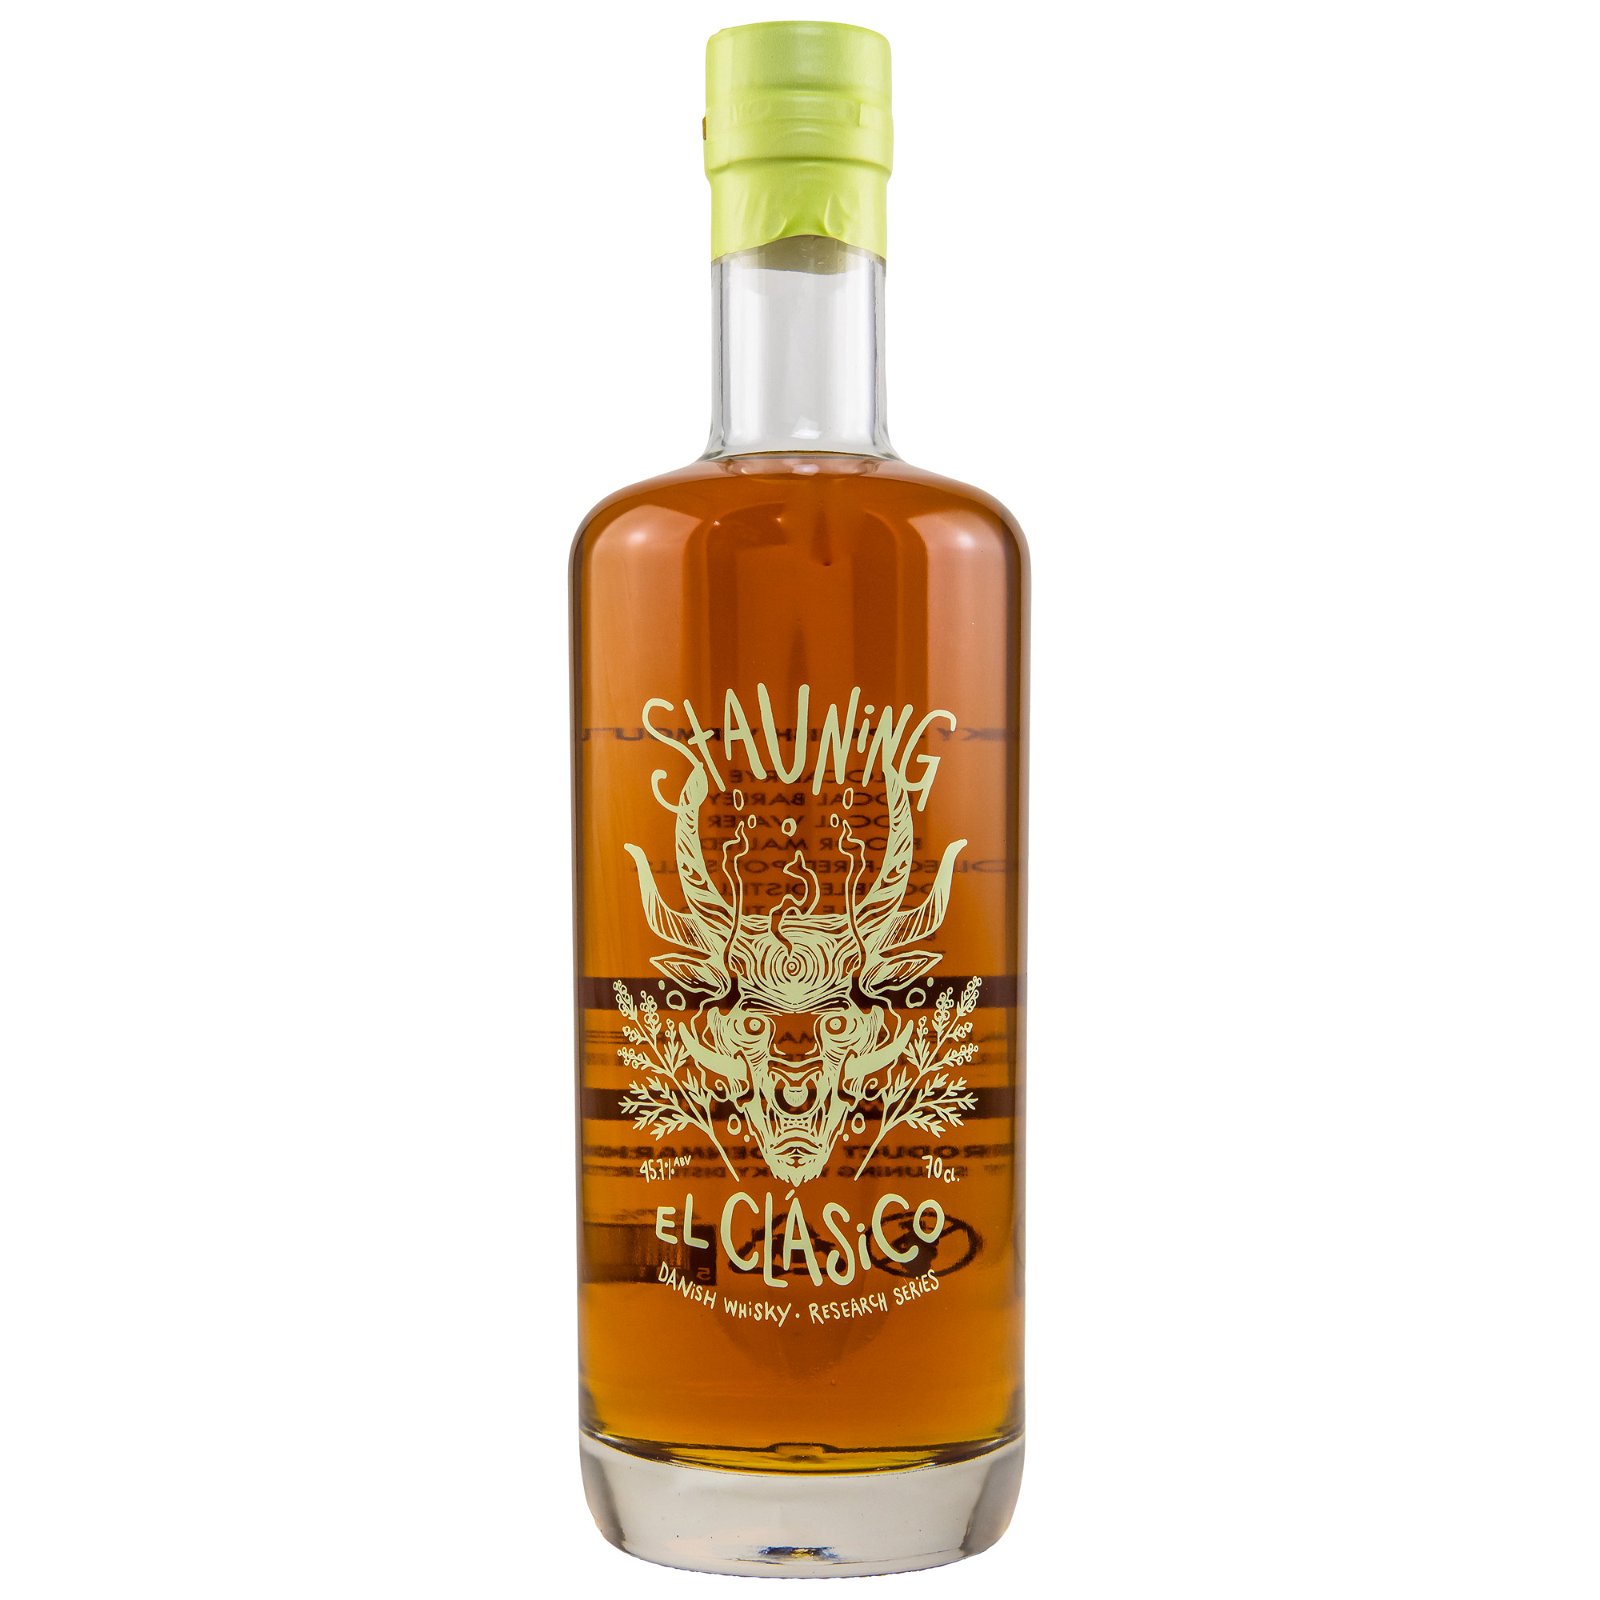 Stauning 2022 El Clásico Spanish Vermouth Cask Batch 2 Research Series